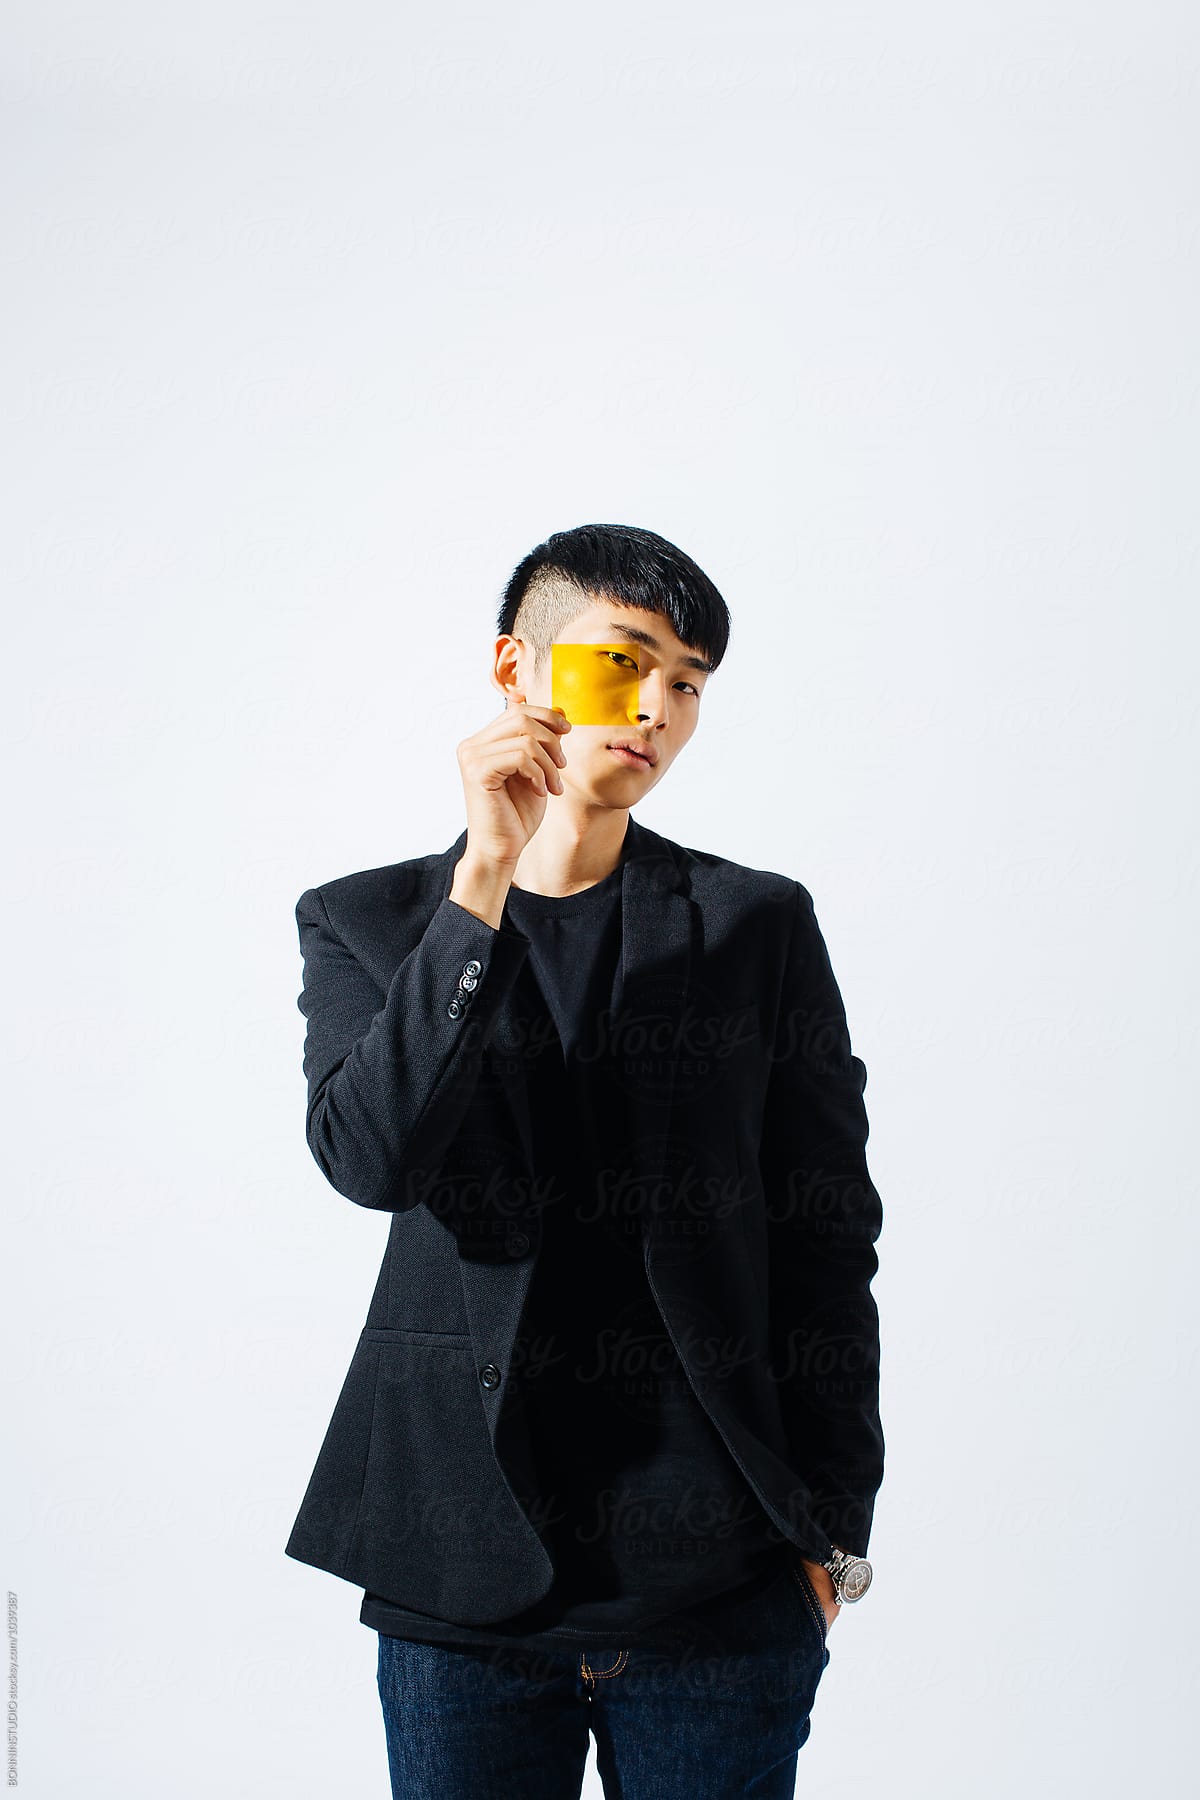 Portrait of an asian man holding a yellow glass in front his face.